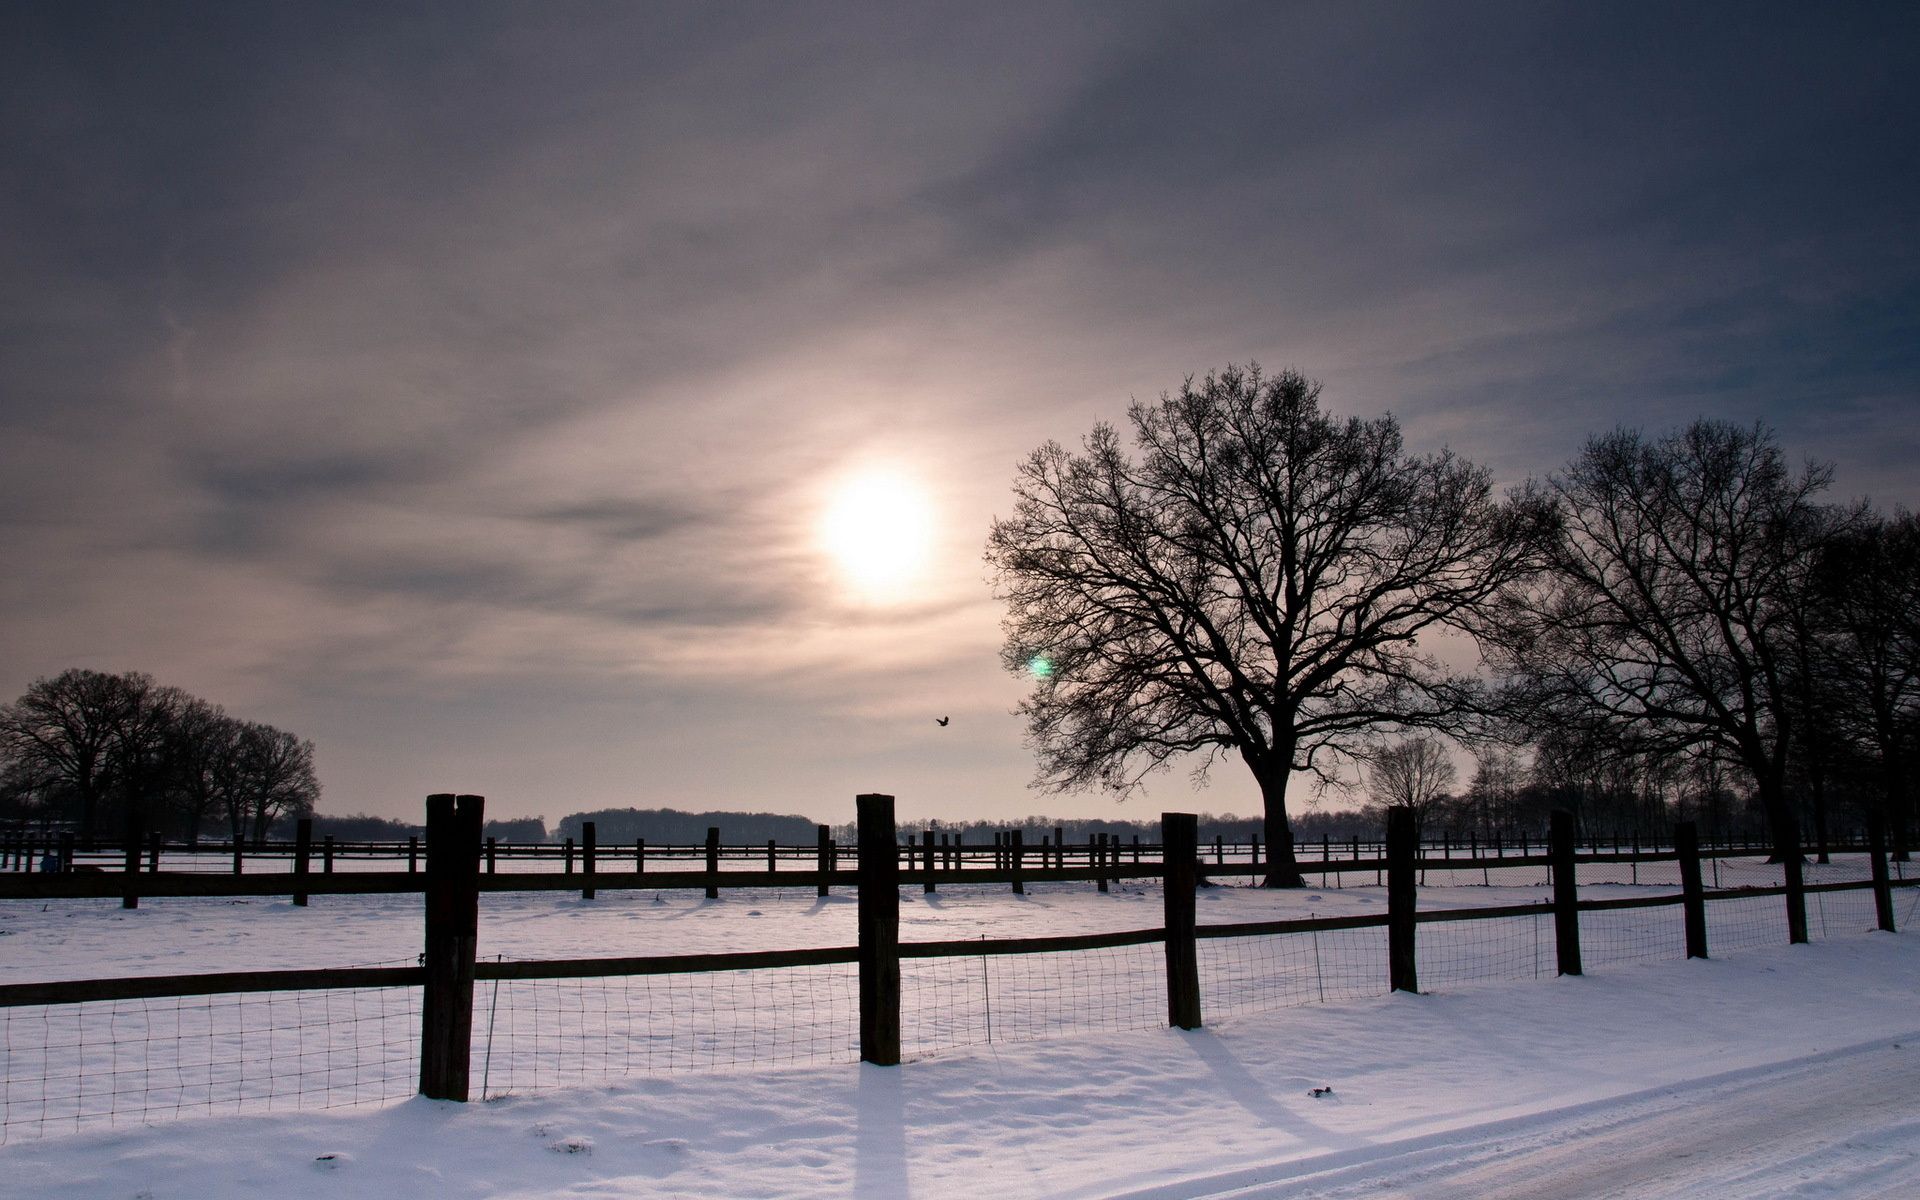 Roads nature landscapes winter snow fence fields trees sunset sunrise sky clouds wallpaperx1200